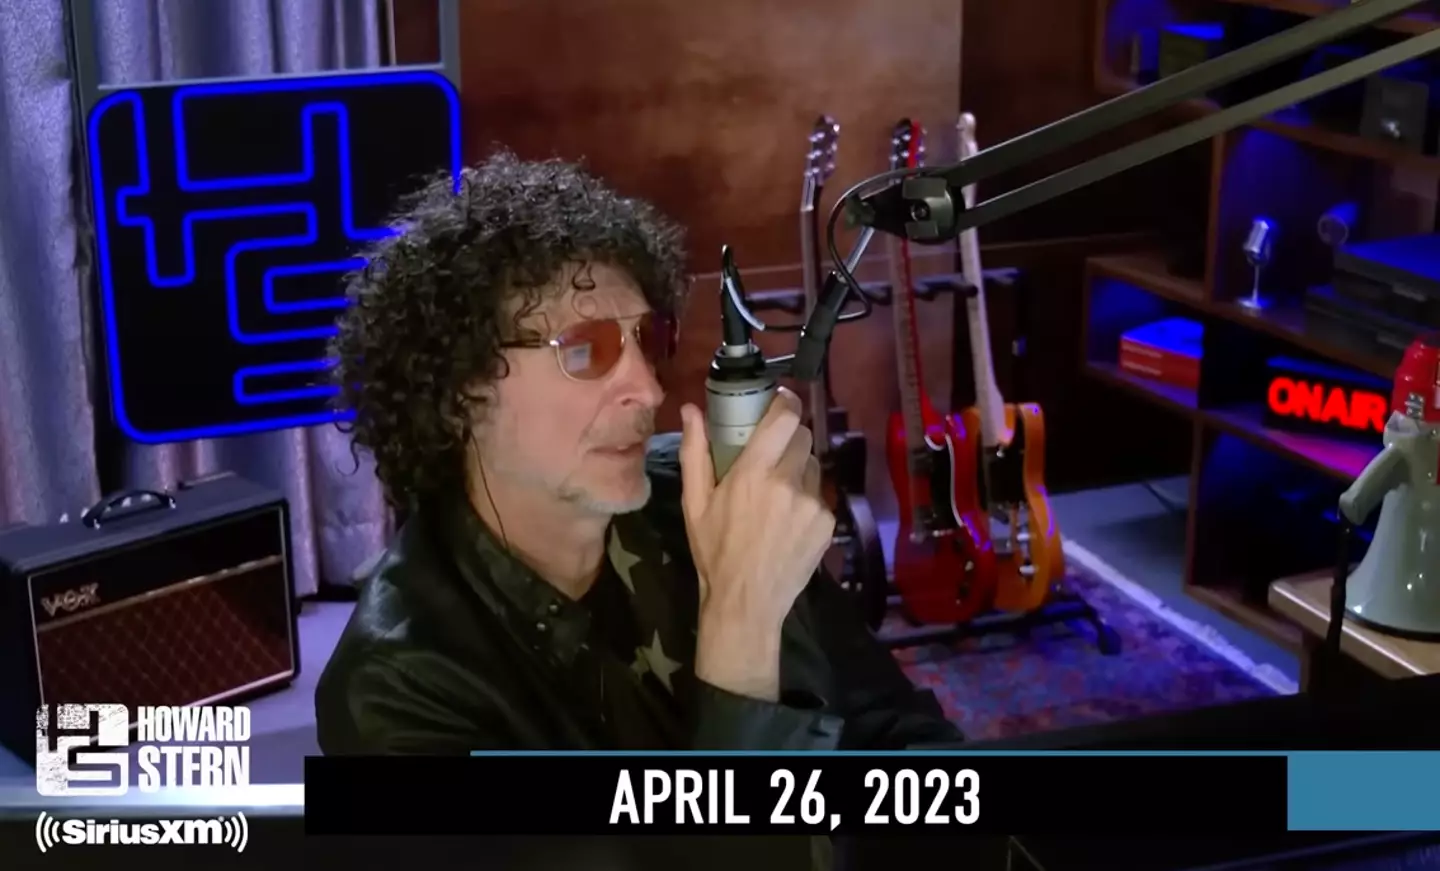 Howard Stern has shared his views on Tucker Carlson's departure from Fox News.